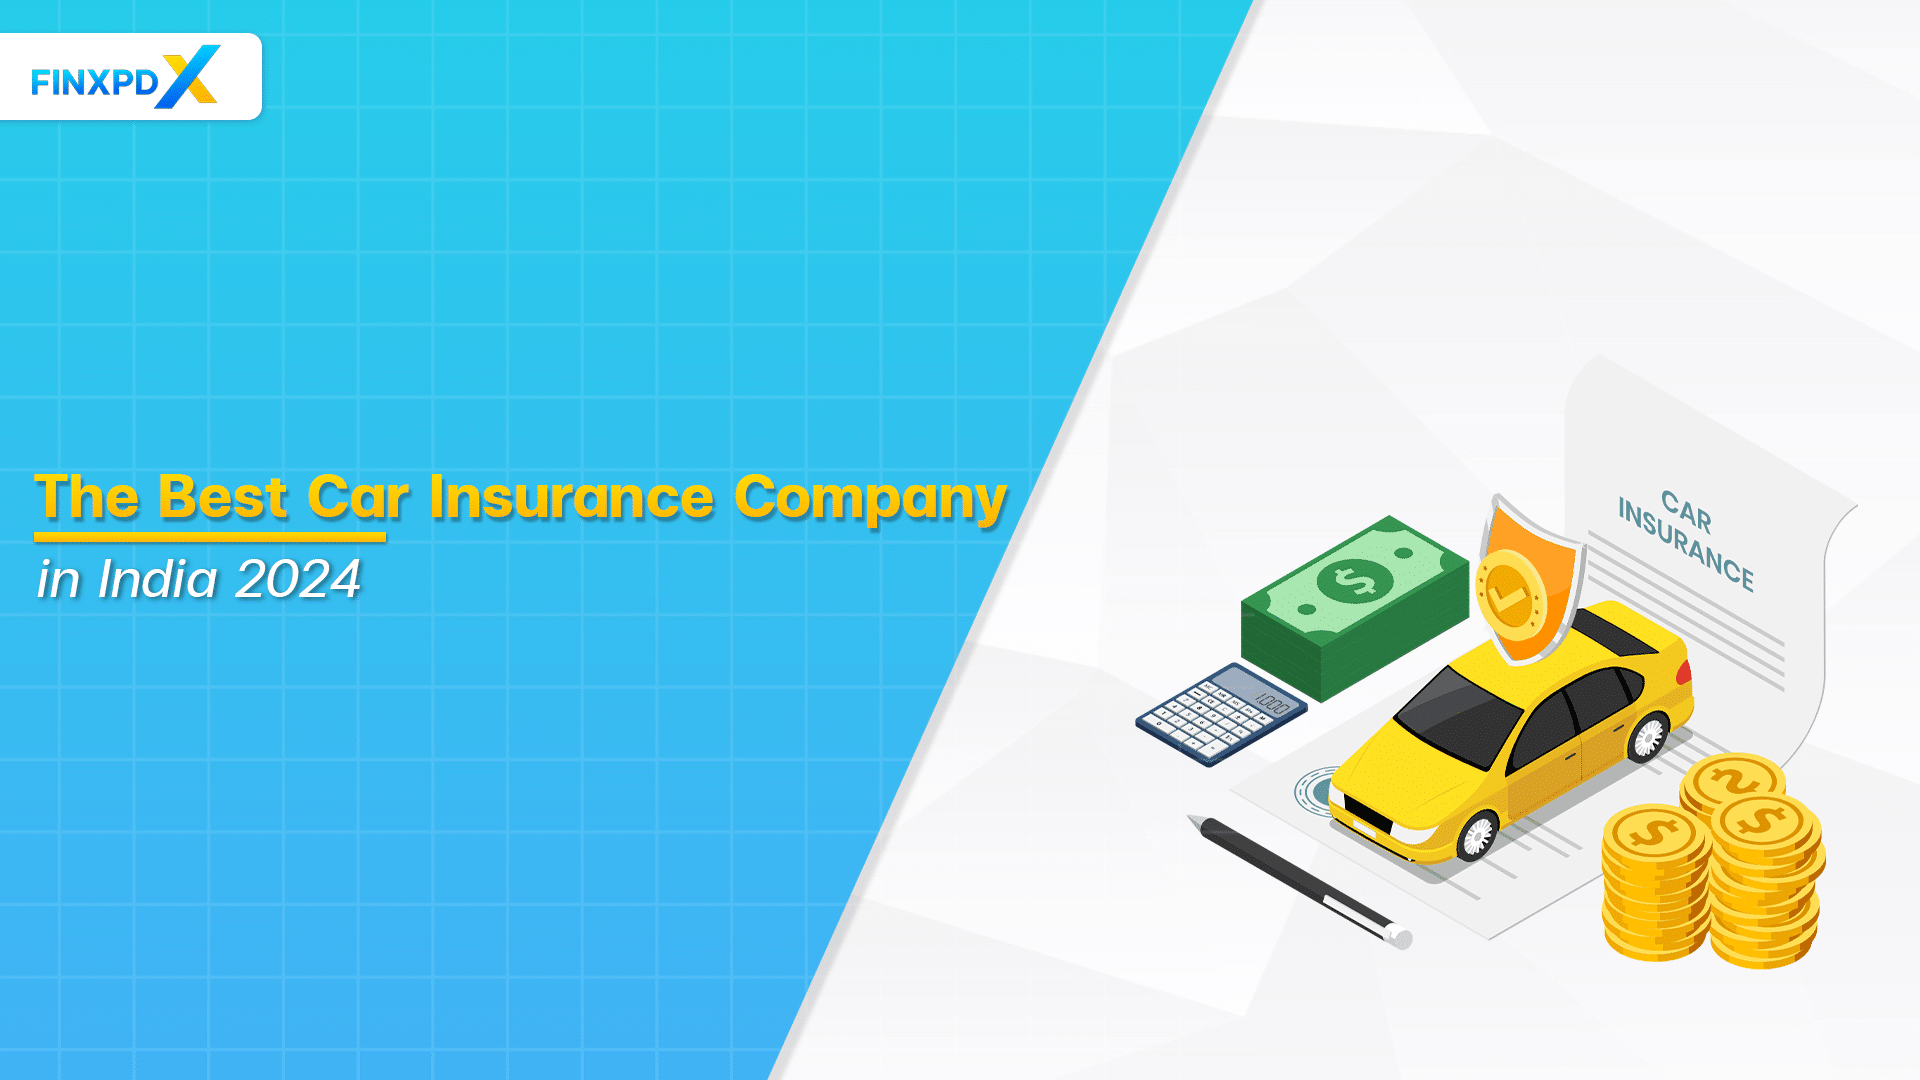 best car insurance company in india